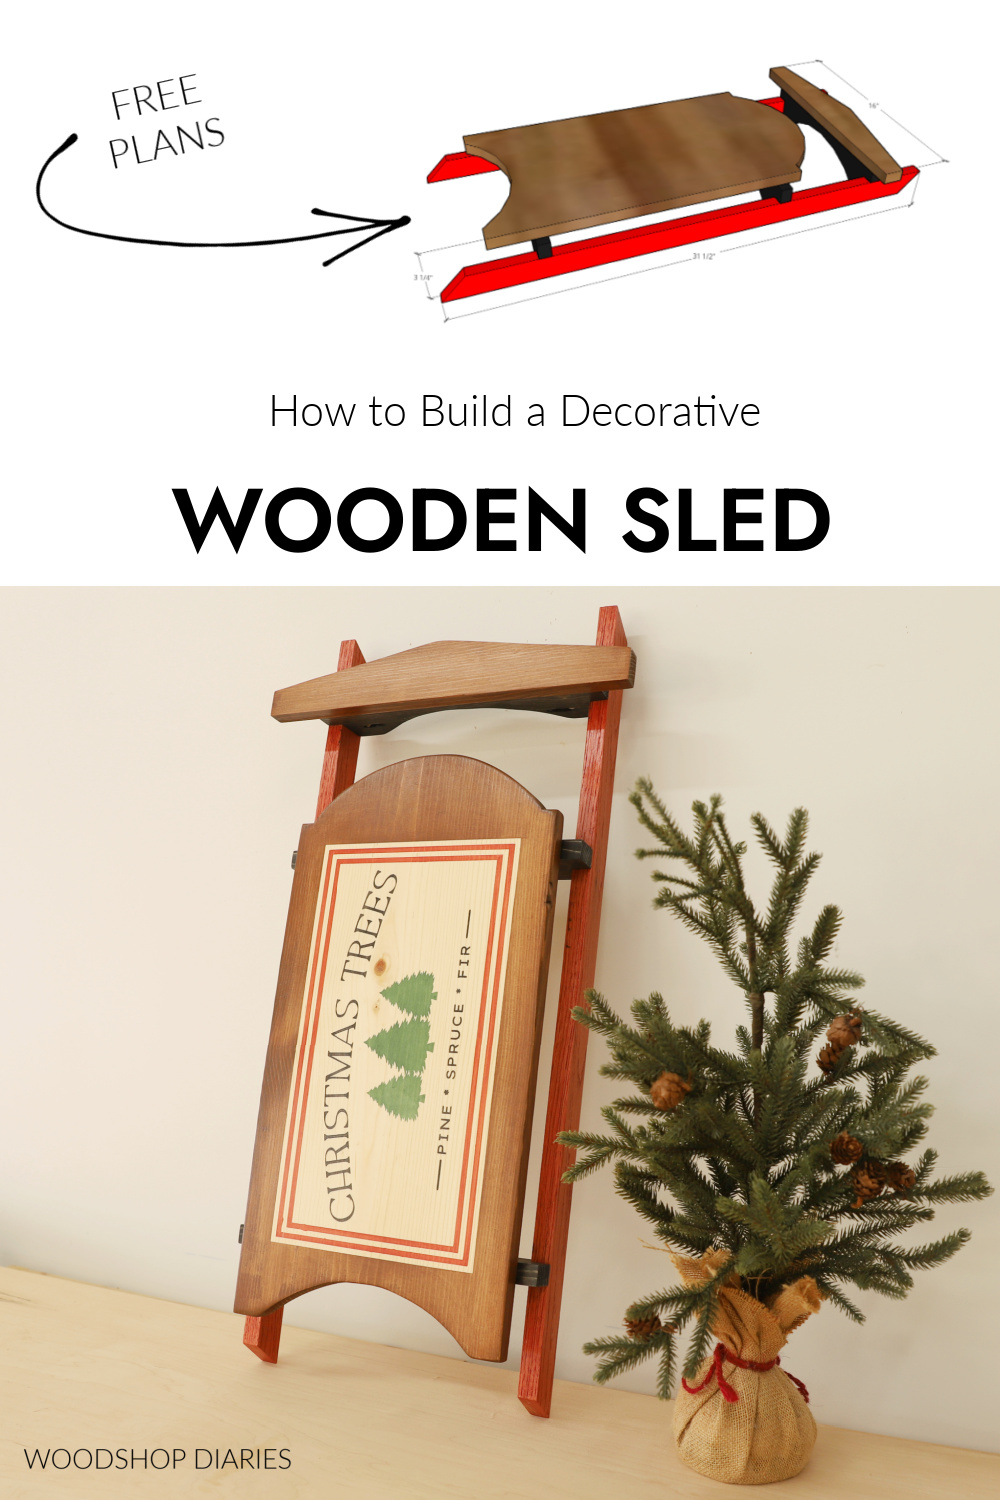 Pinterest collage image showing overall dimensional diagram of wooden sled at top and completed DIY wooden sled at bottom with text "how to build a decorative wooden sled"